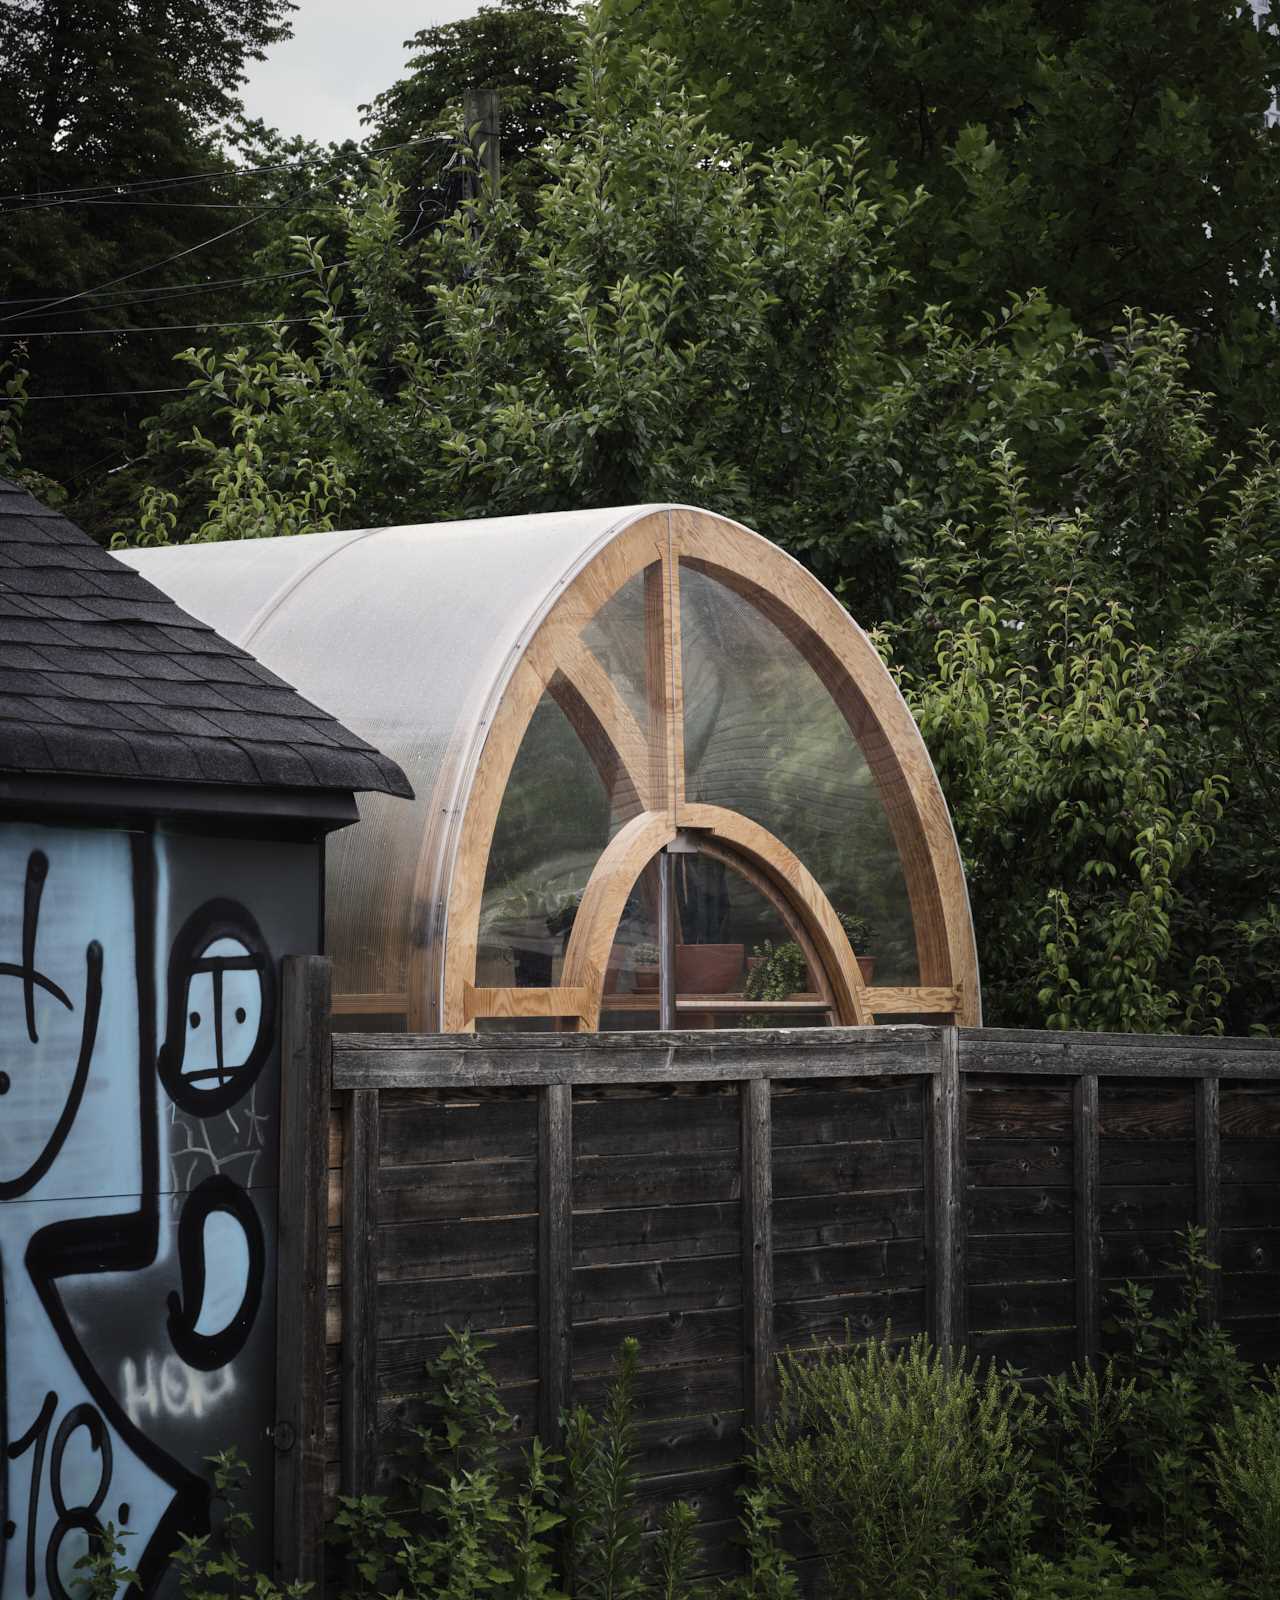 A modern and modular greenhouse design with a curved shape made from marine-grade plywood ribs and polycarbonate sheet.